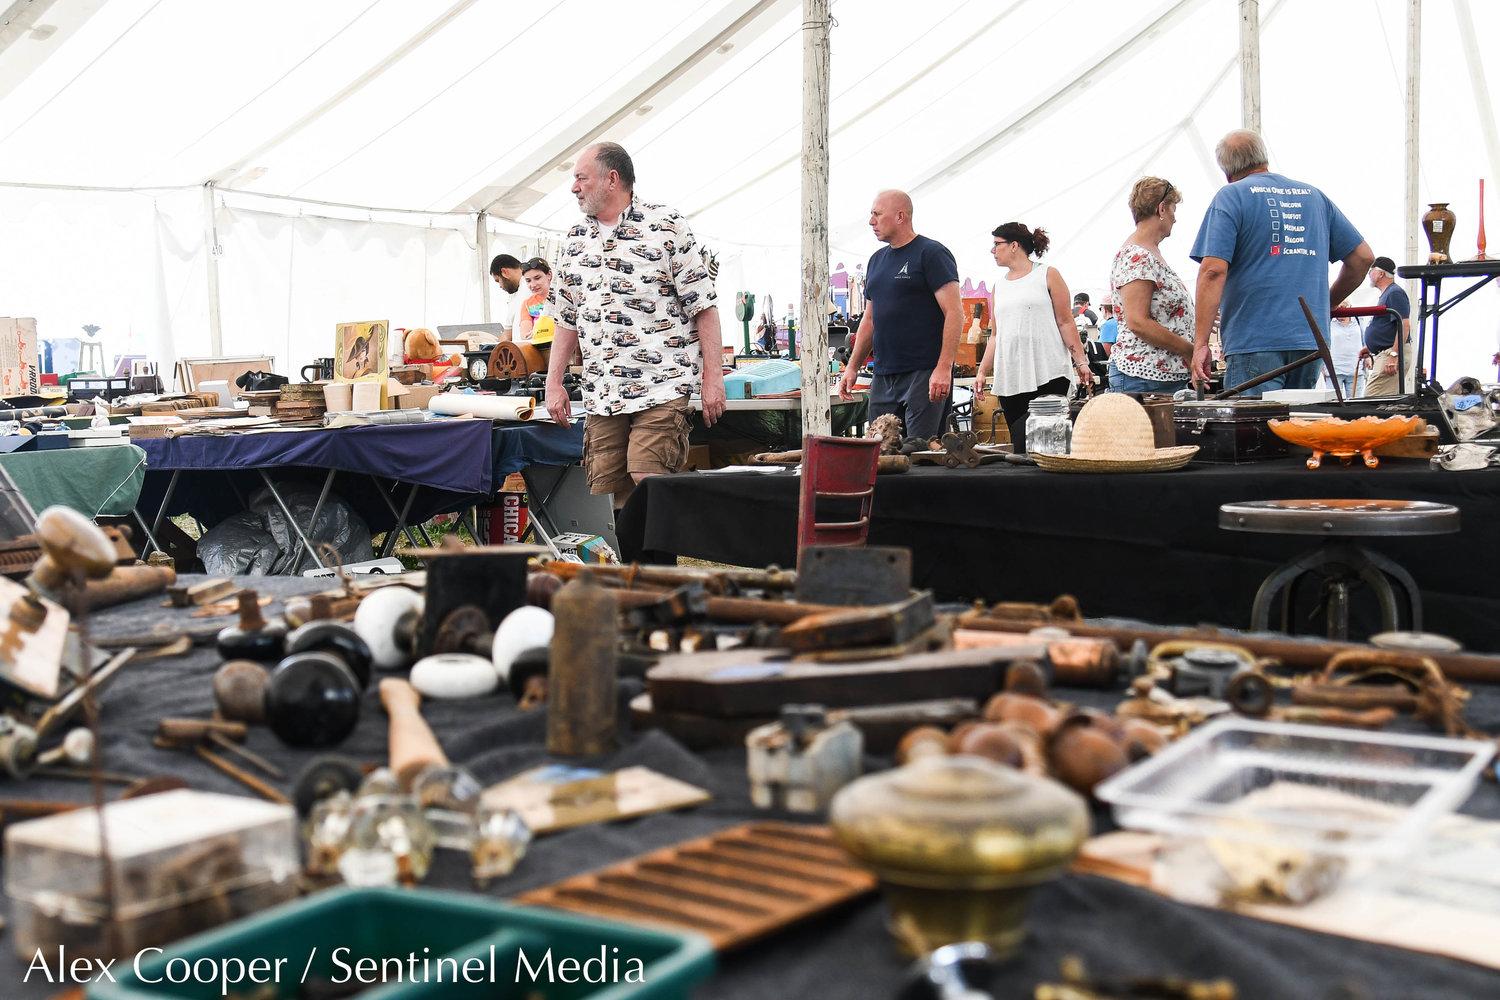 The famed Madison-Bouckville Antique Week returned on Monday, August 15. The event will continue until Monday August 21 with more than 2000 vendors on 13 show fields from Madison to Bouckville on Route 20.